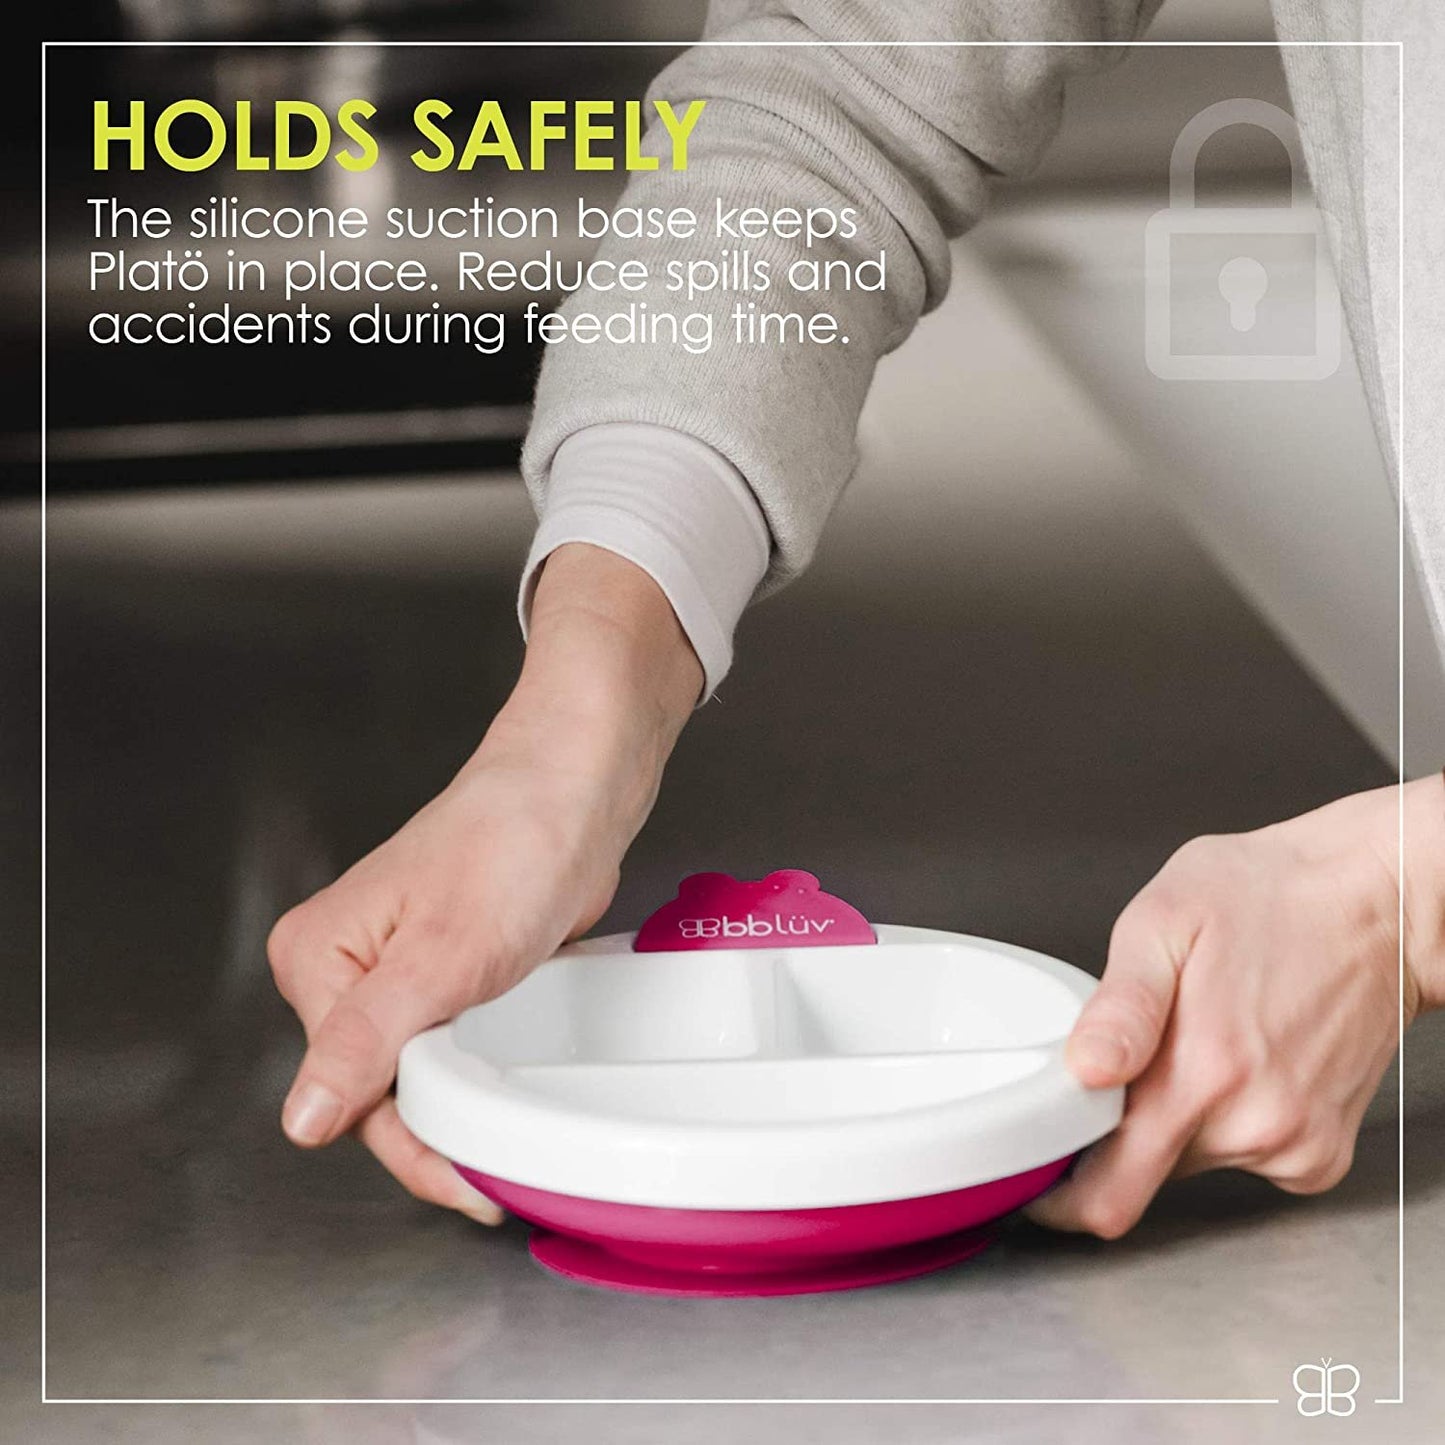 bblüv - Platö - Warming Plate - 3 Compartment, BPA Free with Suction Base for Baby Toddler (Pink)